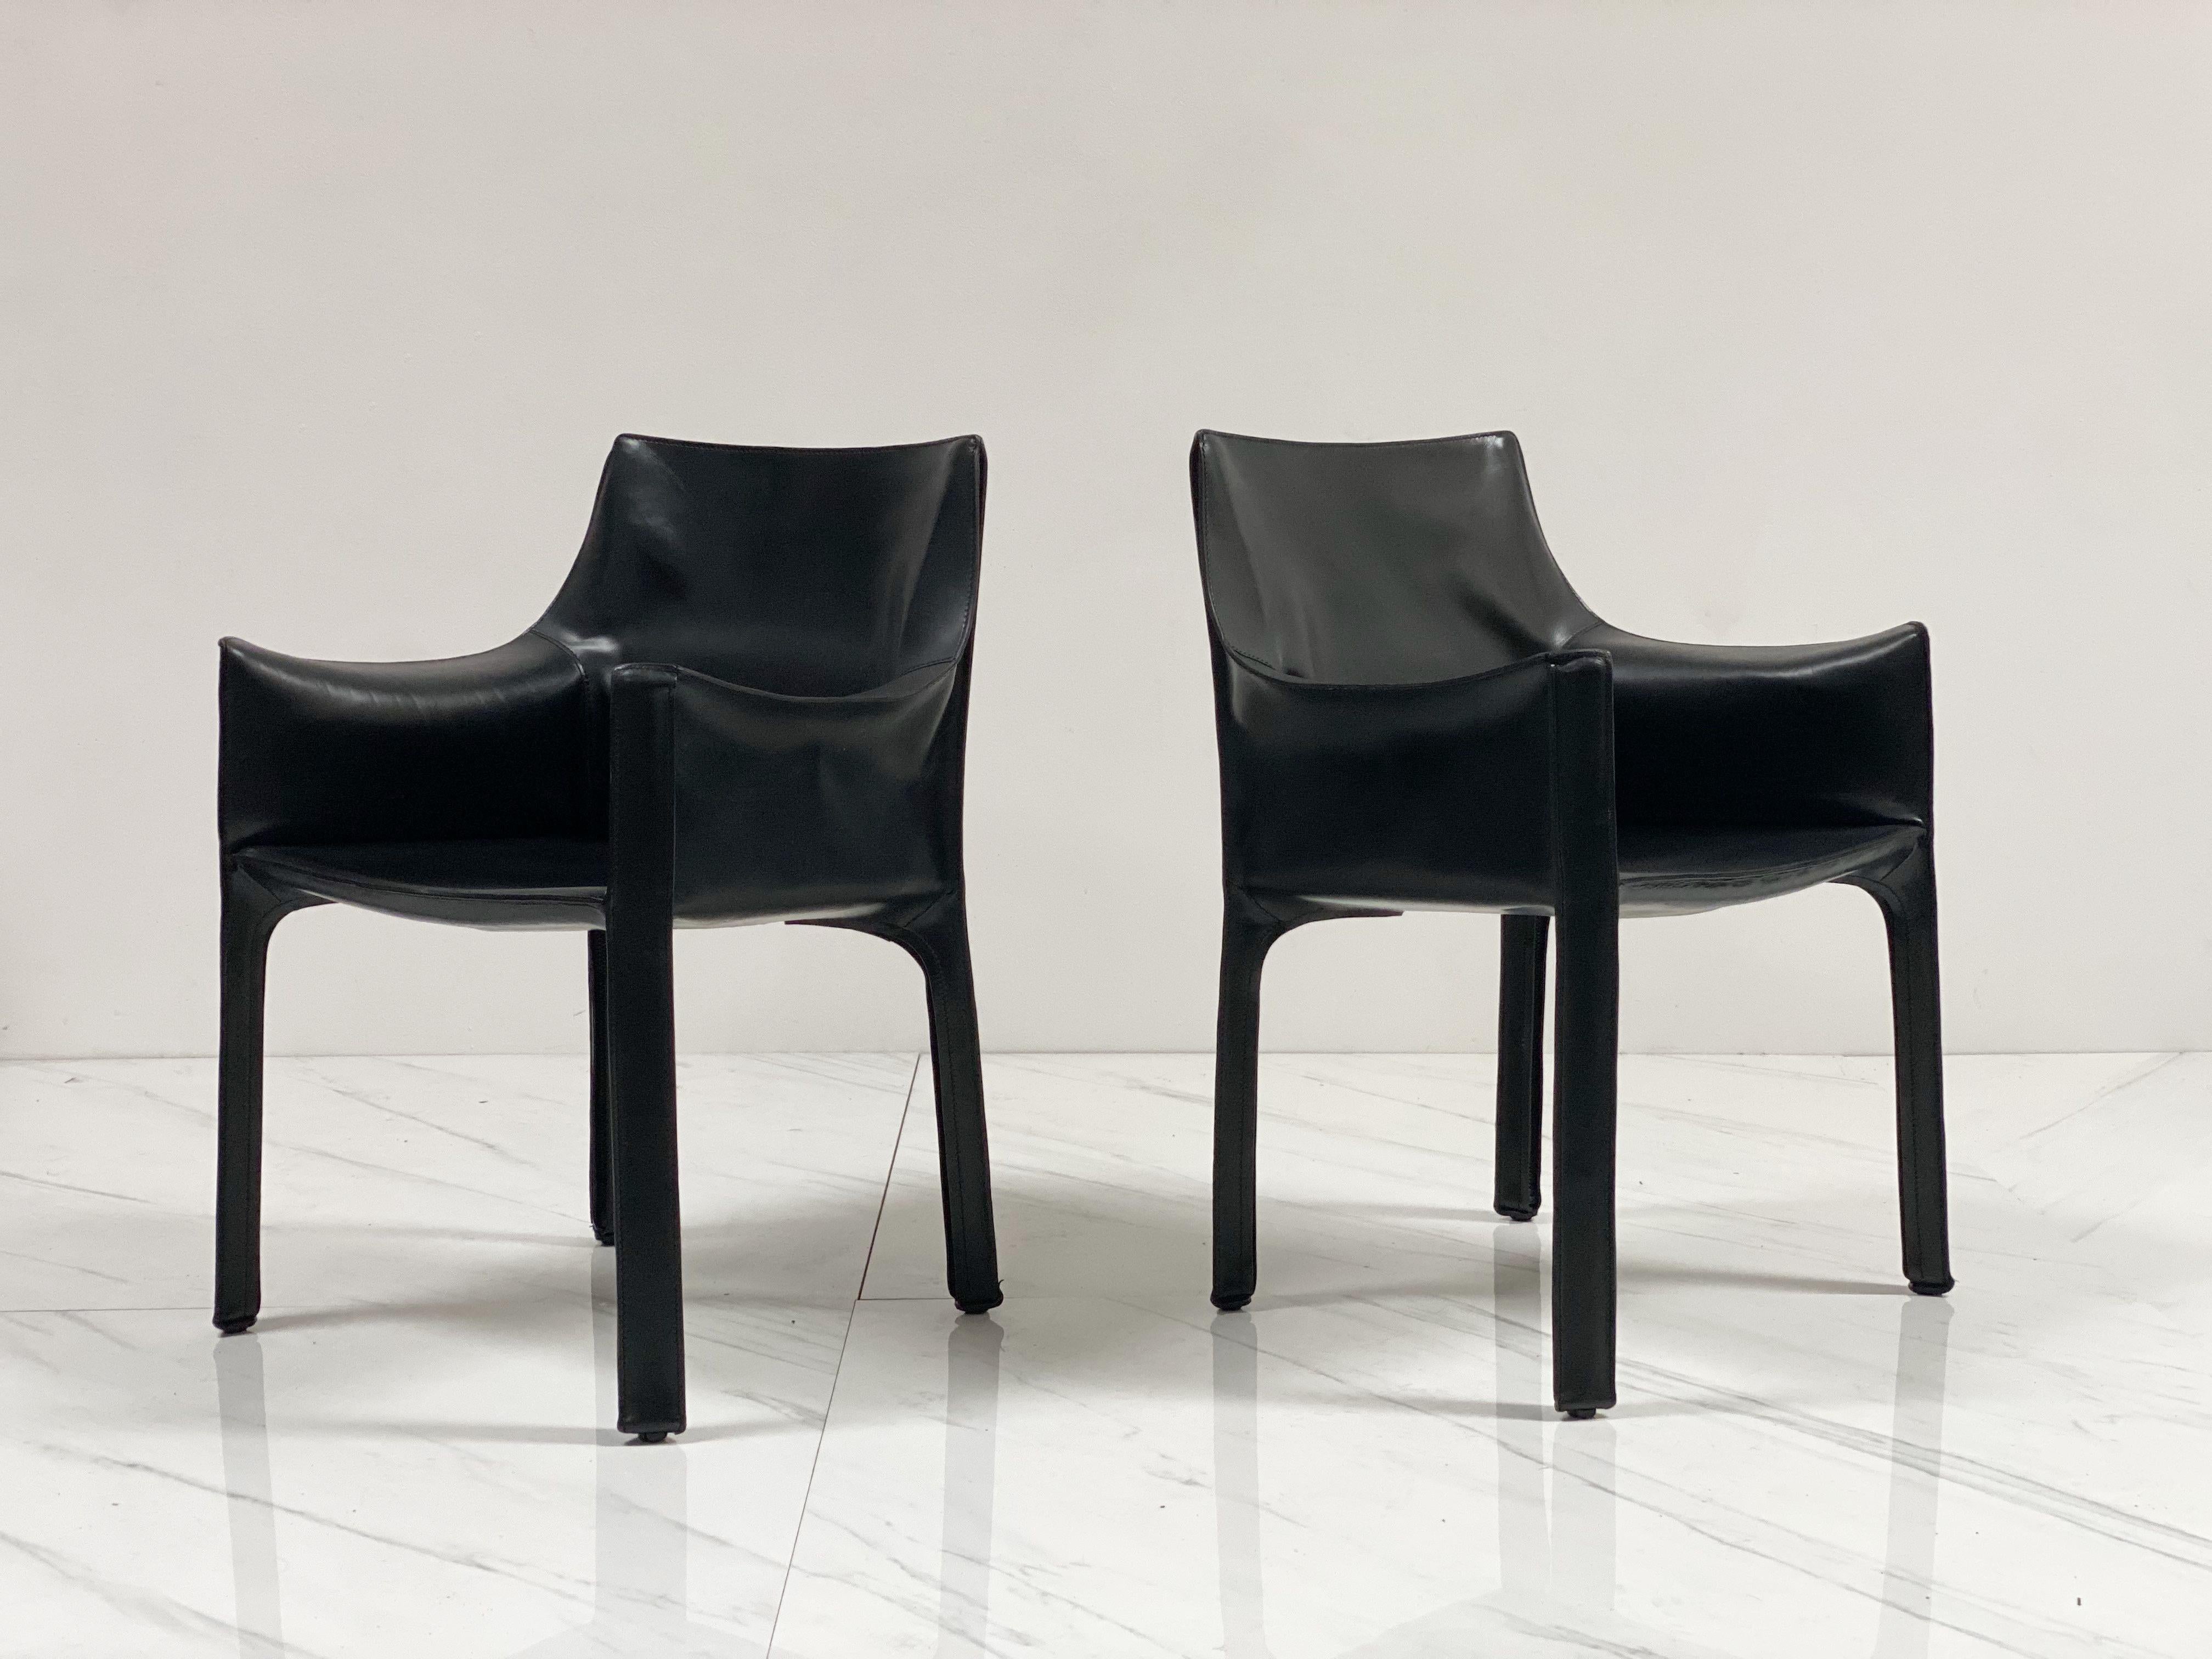 Early Production 'Cab' Armchairs by Mario Bellini for Cassina, c 1978, Signed 1